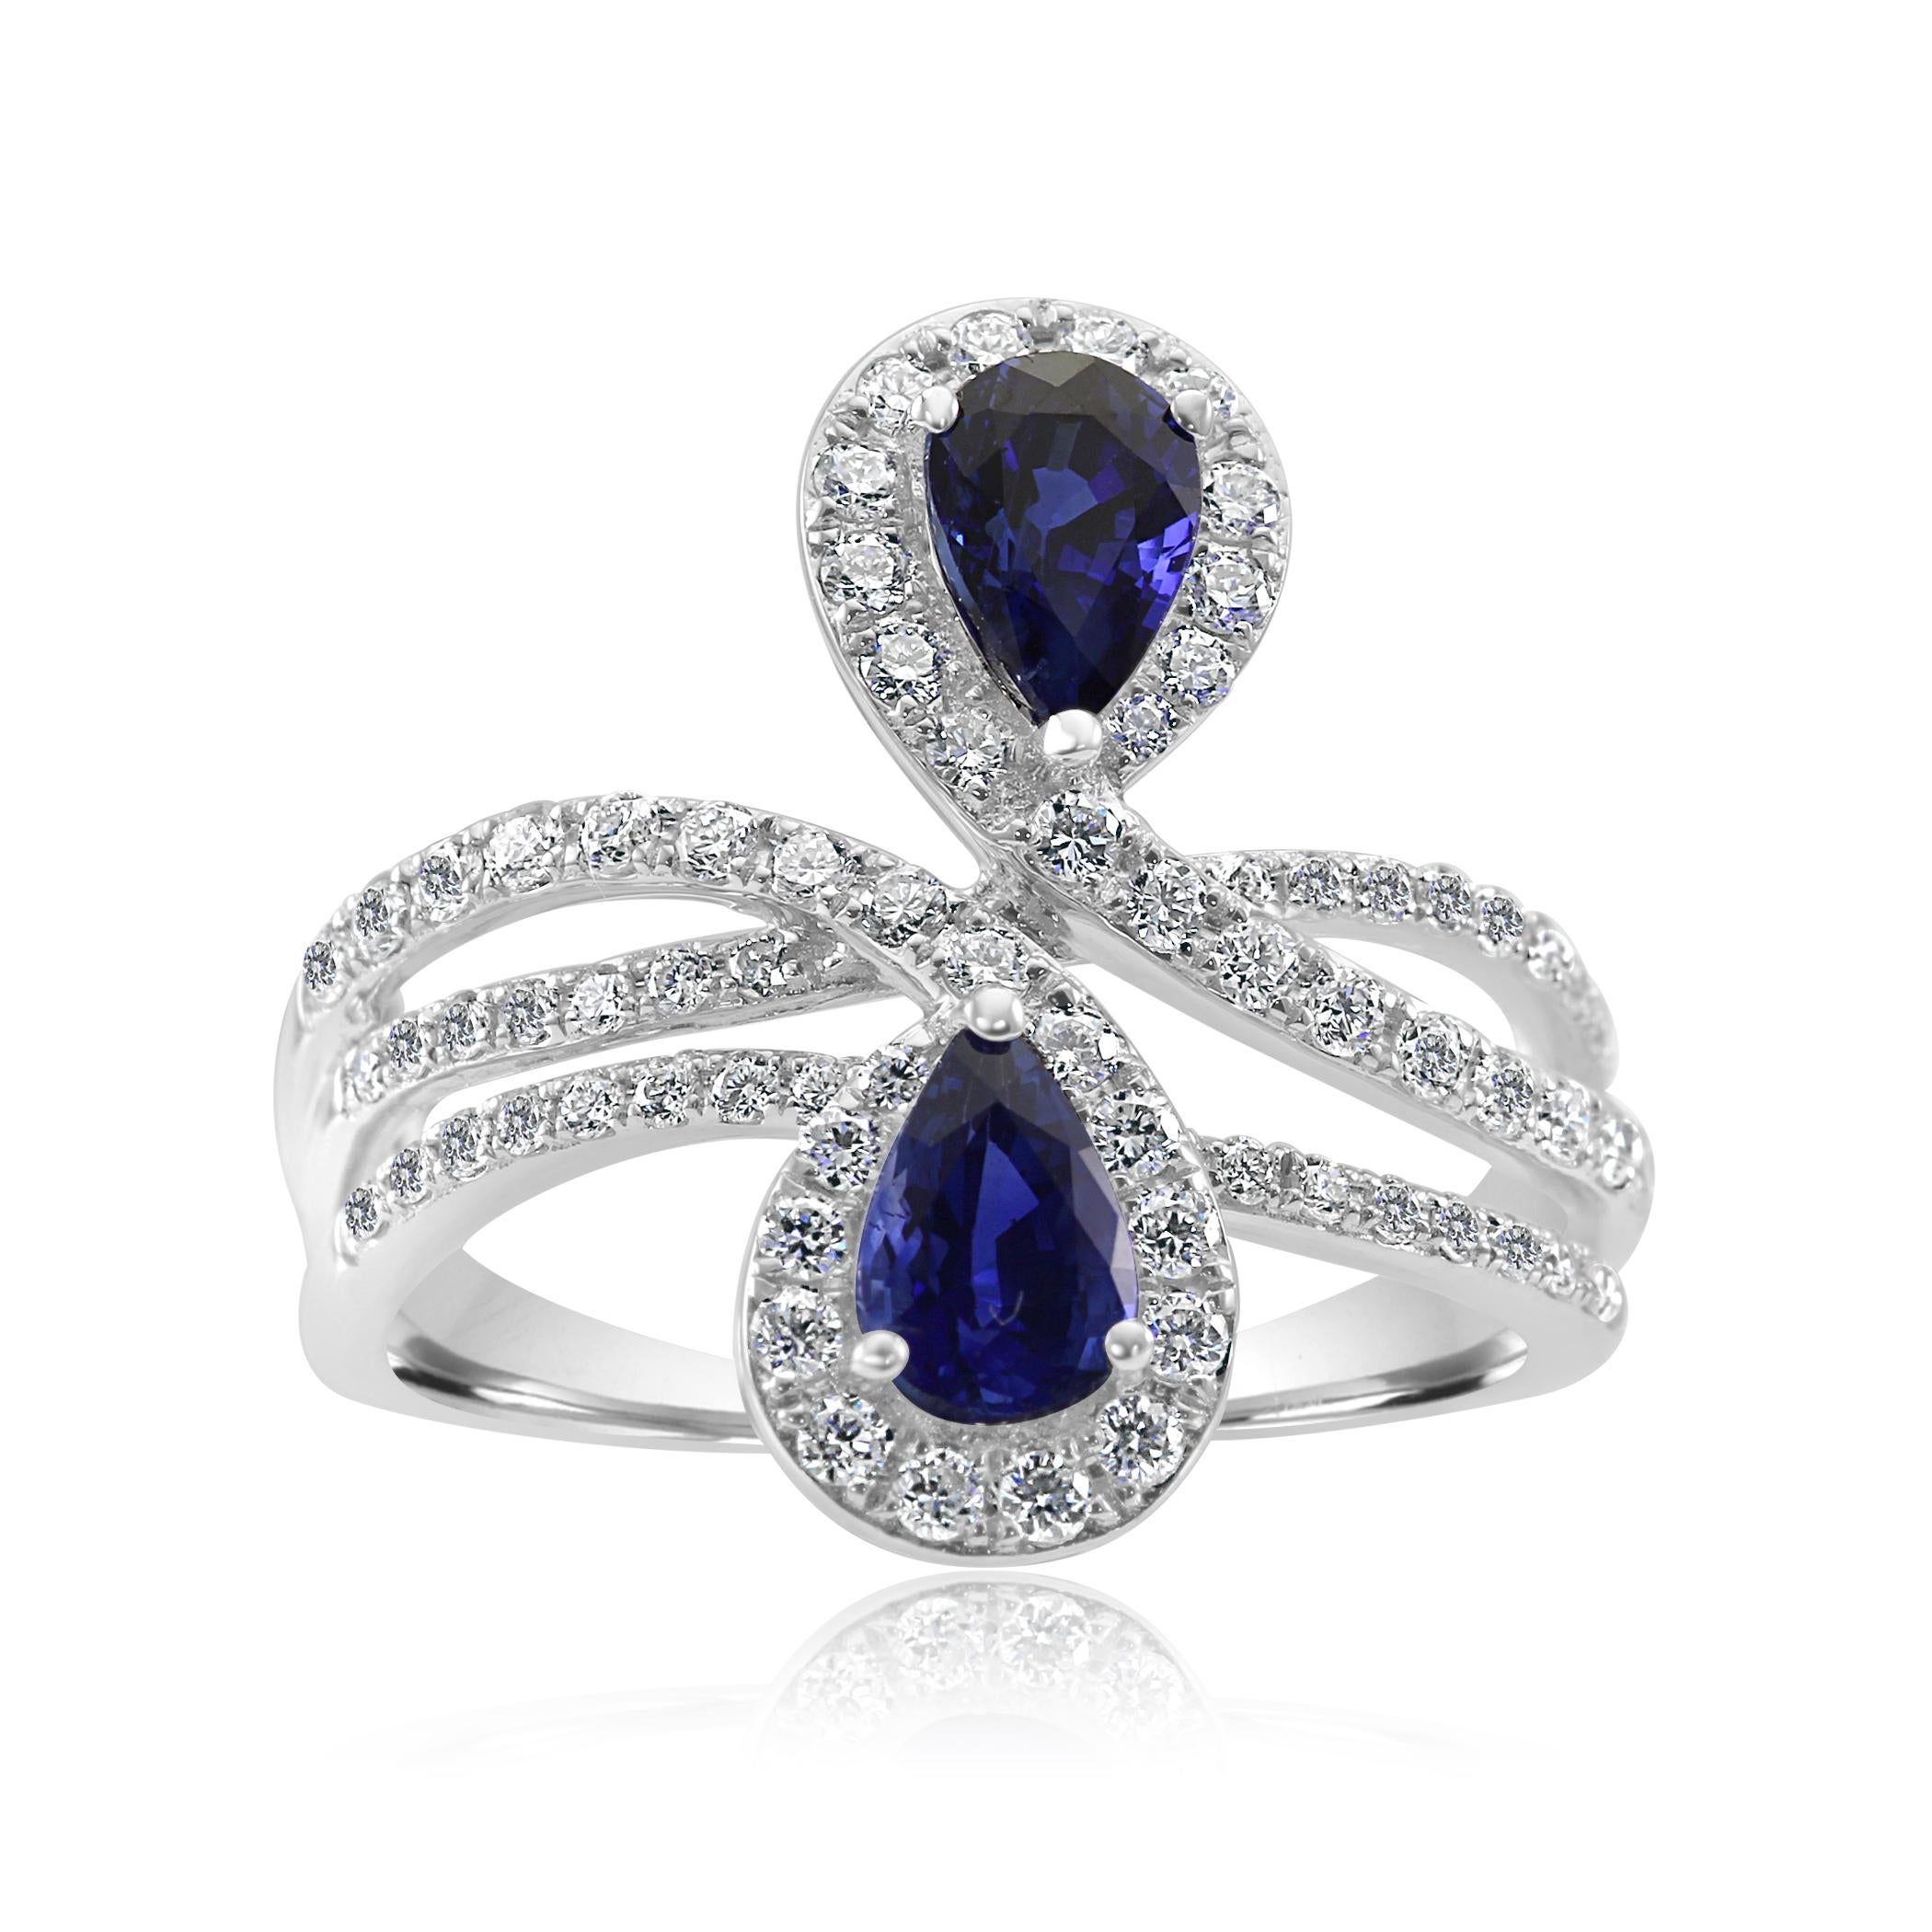 2 Stunning Blue Sapphire Pear 1.16 Carats encircled in single Halo of 73 White Colorless SI Clarity Diamond Rounds 0.59 Carat set in Gorgeous 14K White Gold Fashion Cocktail Toi Moi Ring.

Total Stone Weight 1.75 Carat

Style available in different